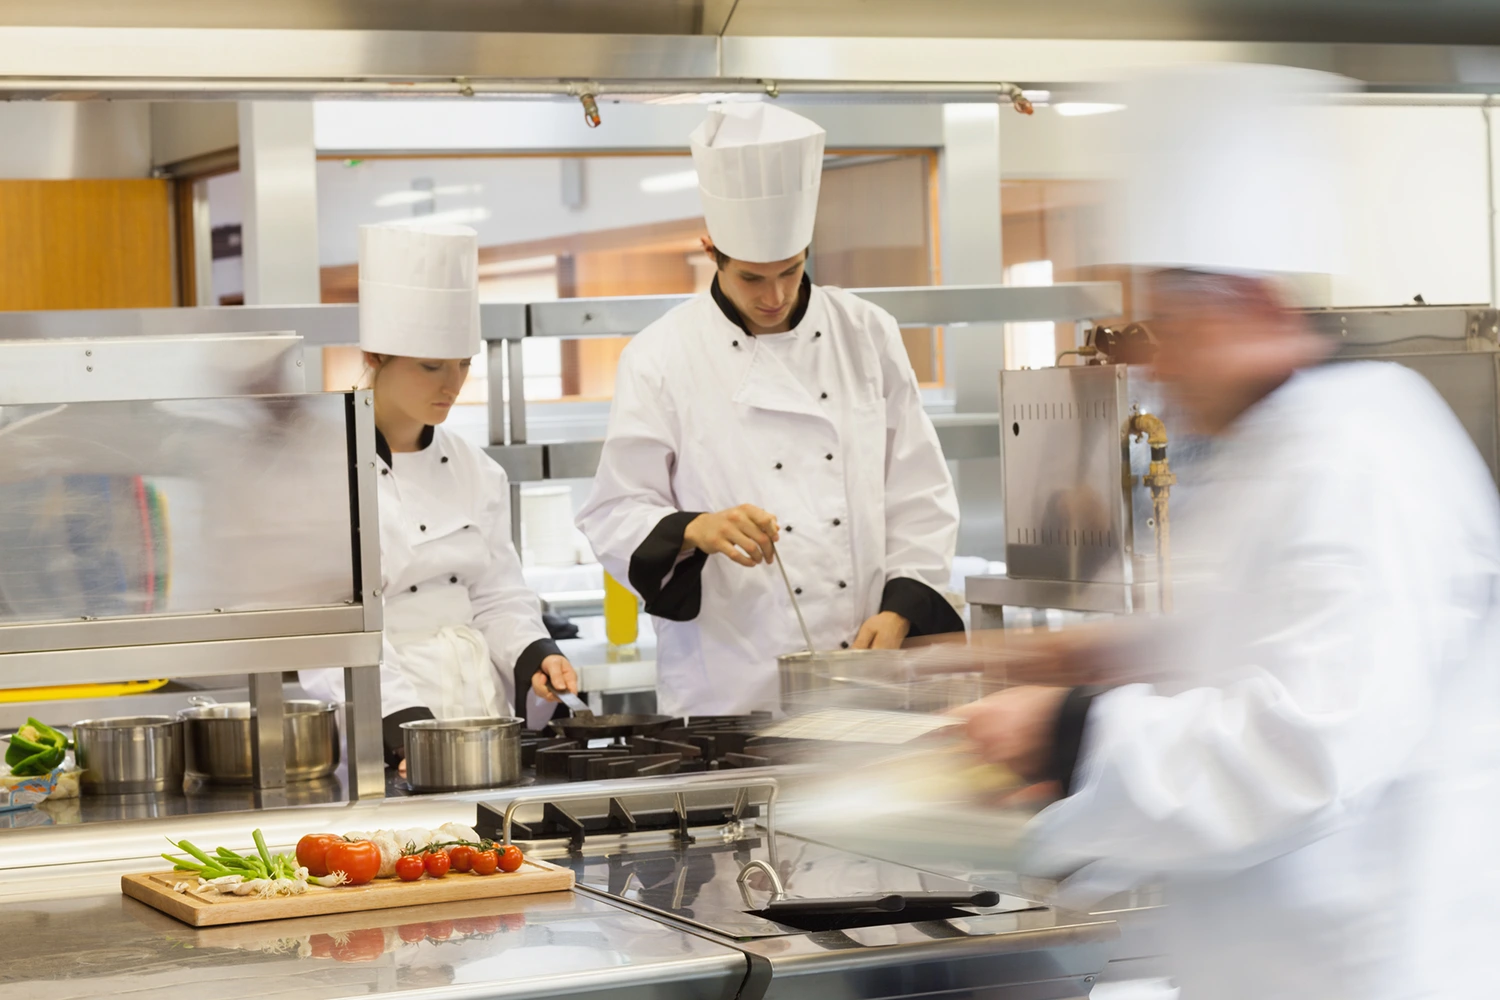 A group of chefs preparing food in a commercial kitchen while considering menu pricing and restaurant profit margins.